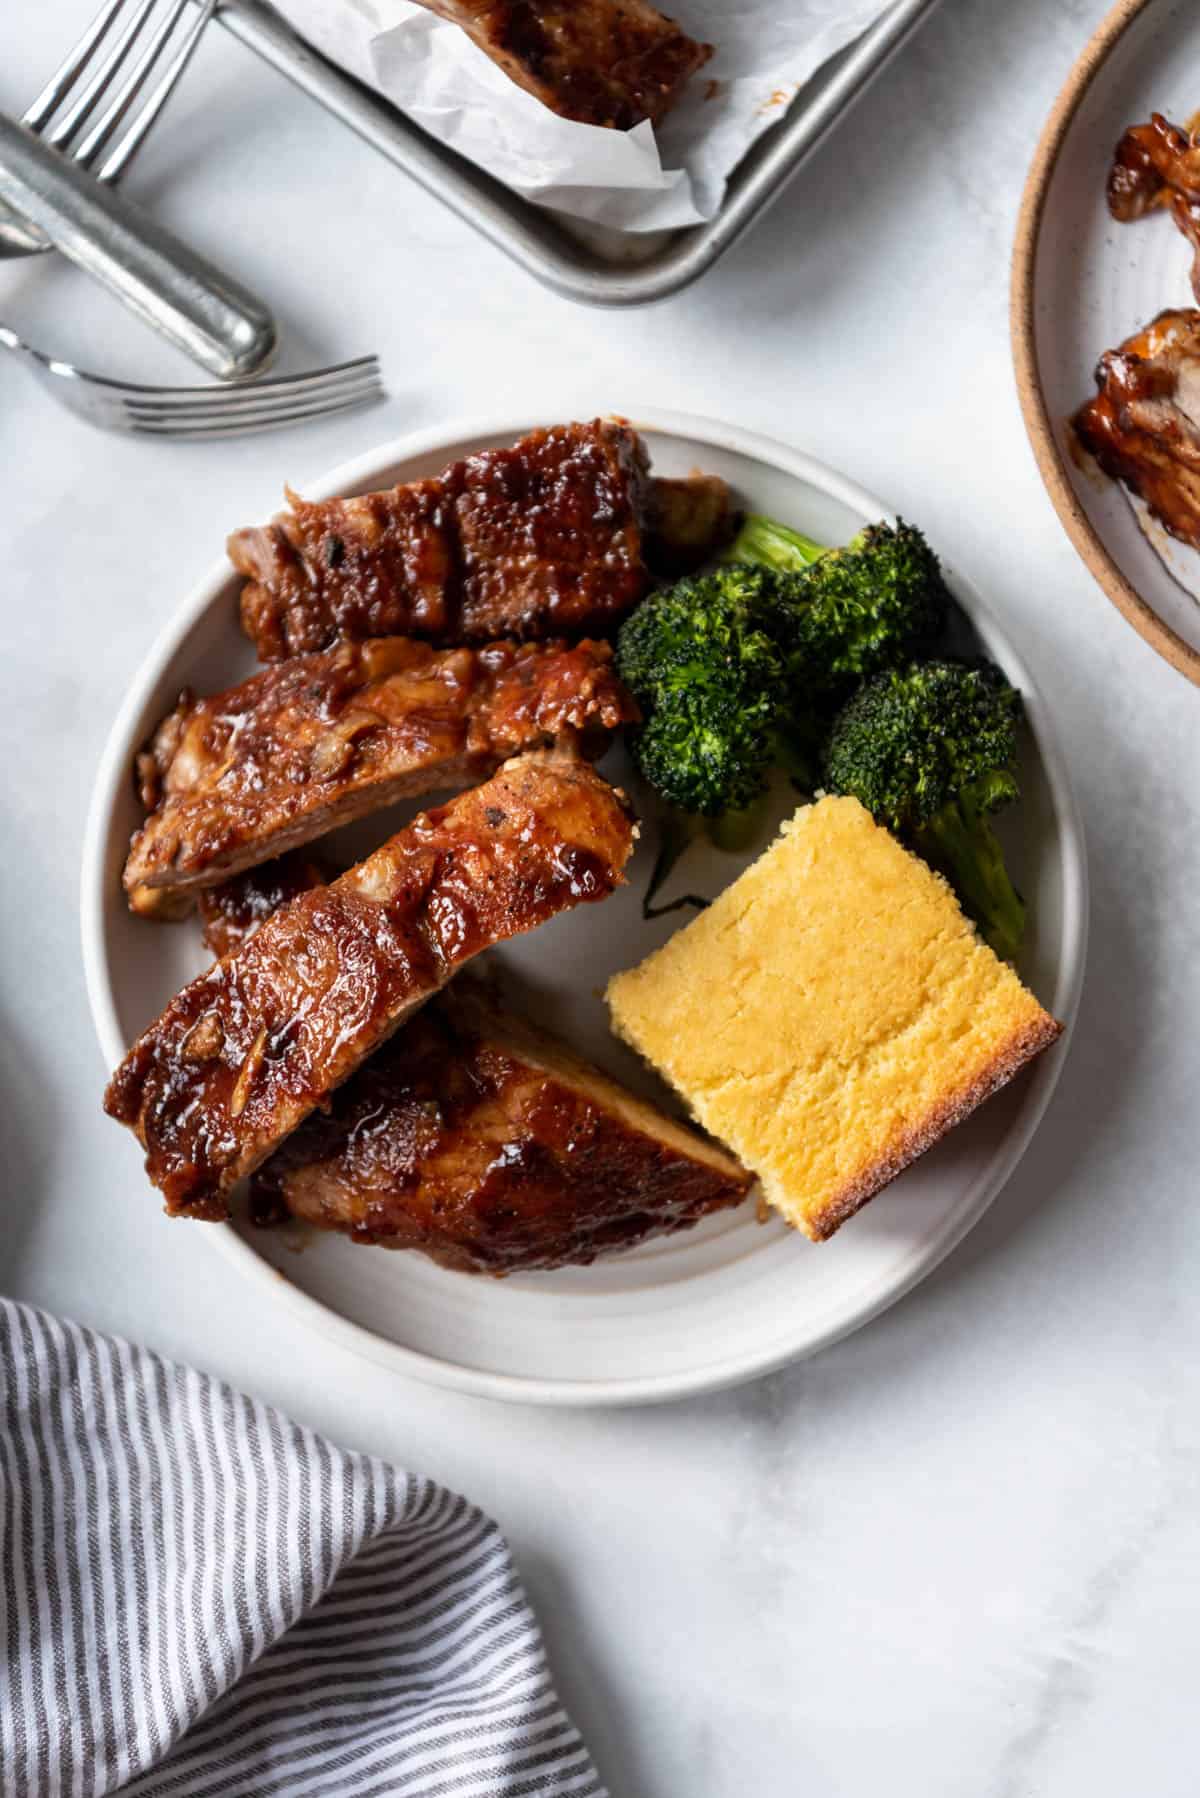 A white plate with four baby back ribs, cornbread, and roasted broccoli.